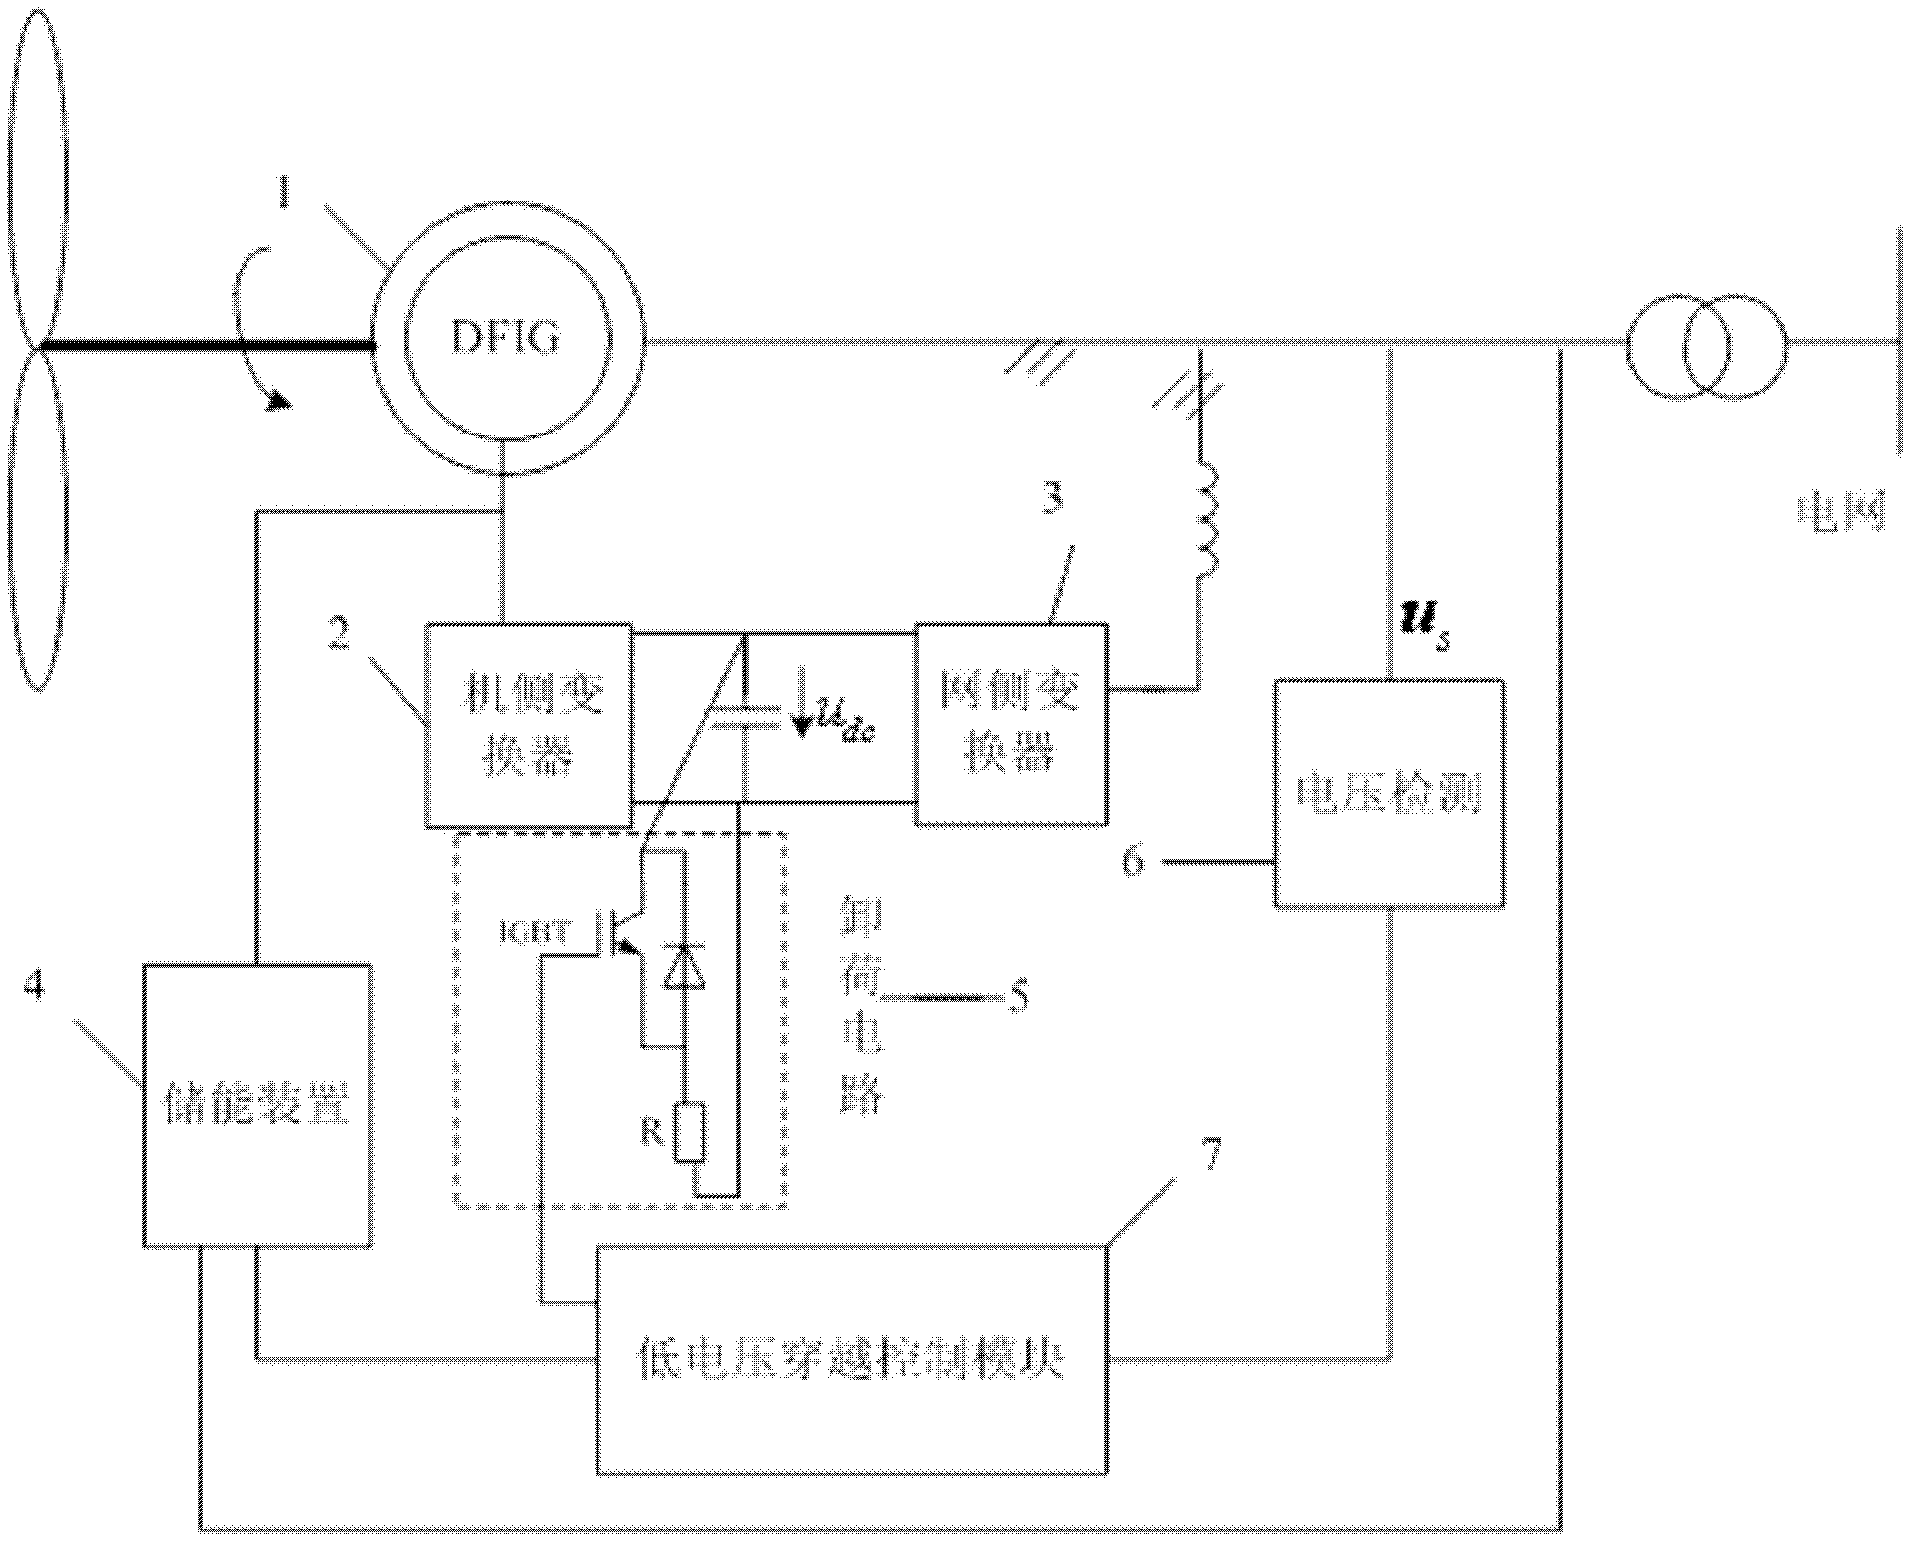 Double-feed wind power generator low-voltage through control system based on energy storage device